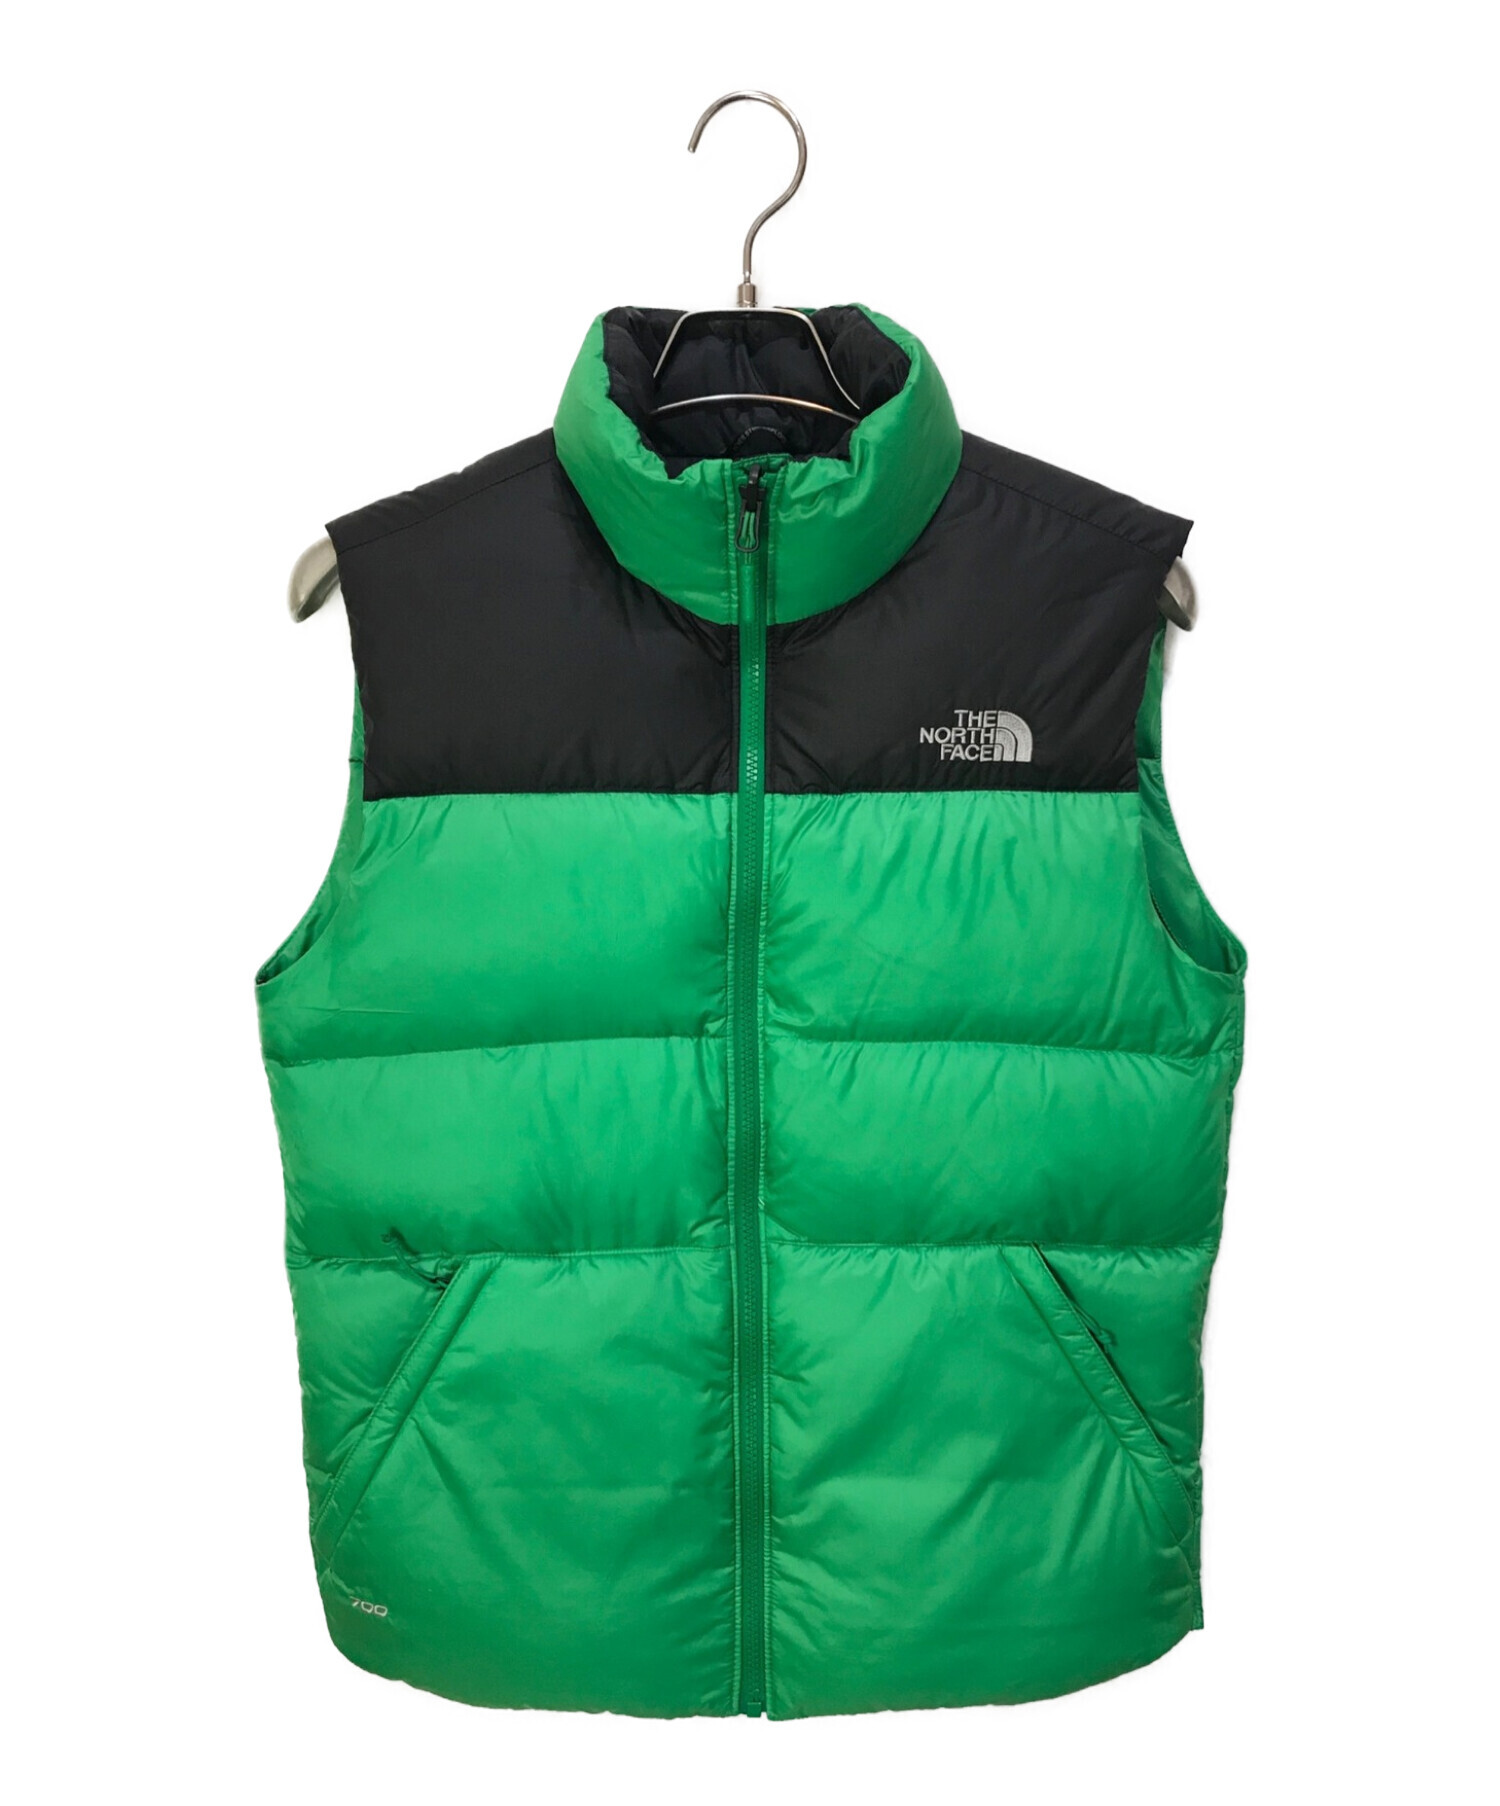 THE NORTH FACE ダウンベスト グリーン-eastgate.mk